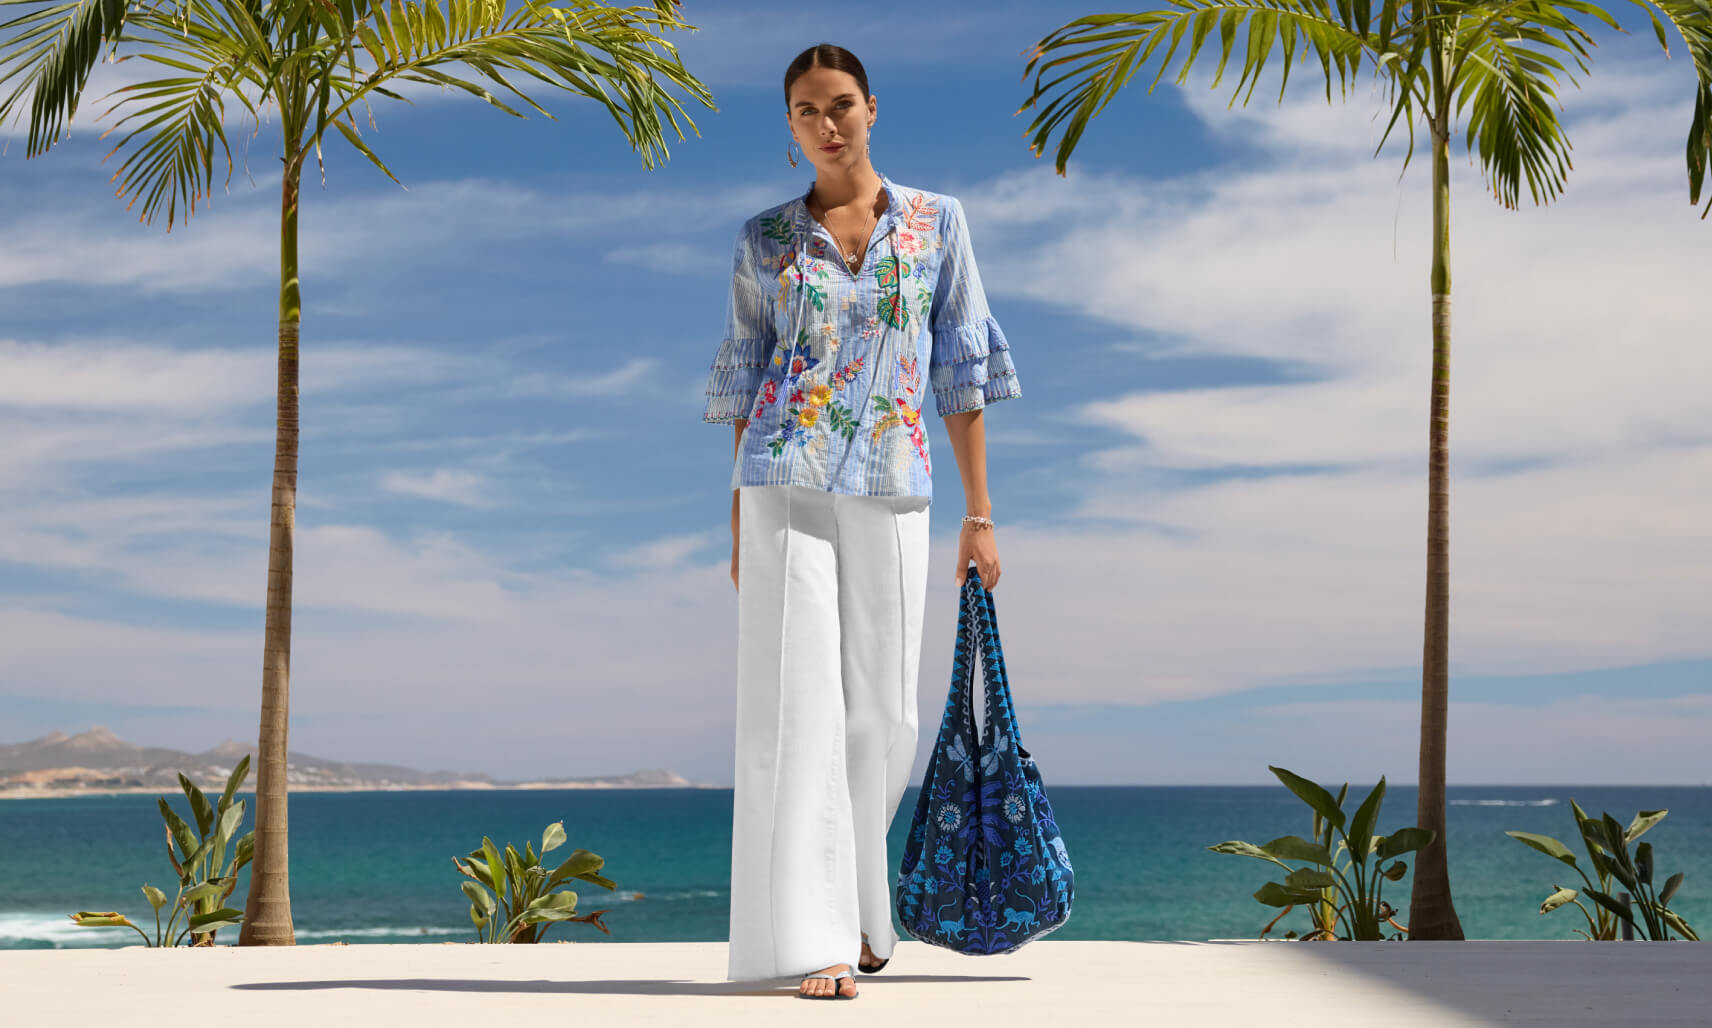 Model wearing embroidered top and white jeans with a blue embroidered bag